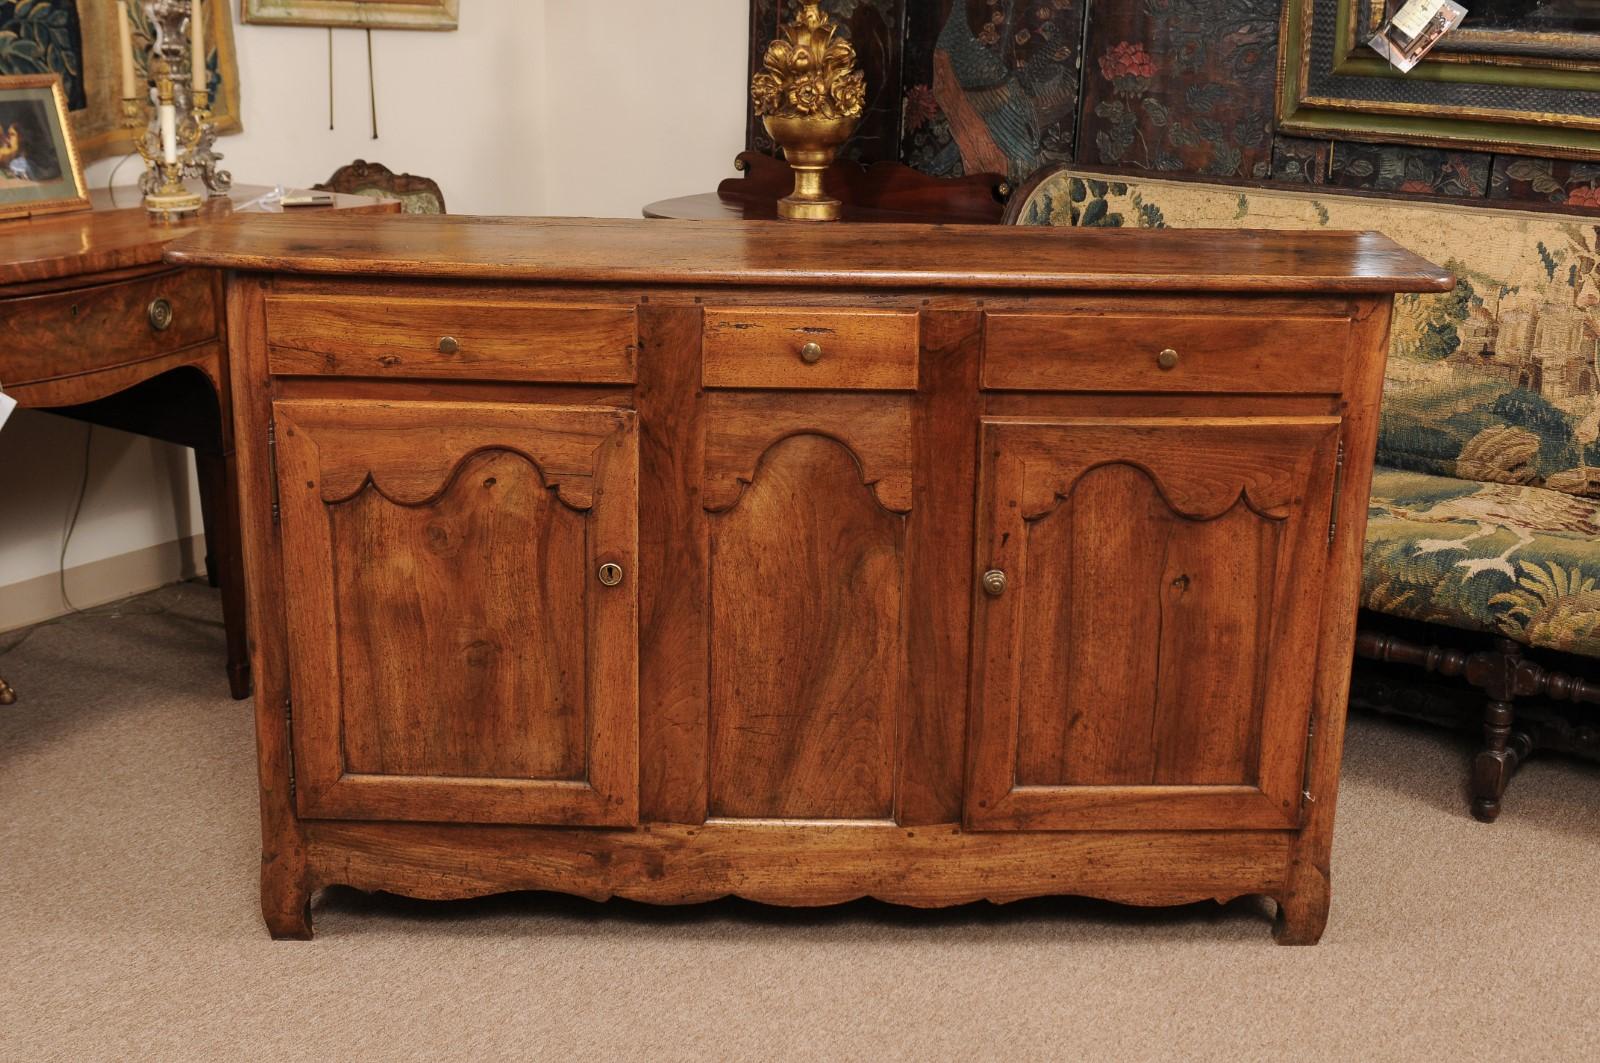 The 19th century, French walnut Enfilade of shallow size with 3 drawers, 2 paneled doors below and shaped apron. 

  